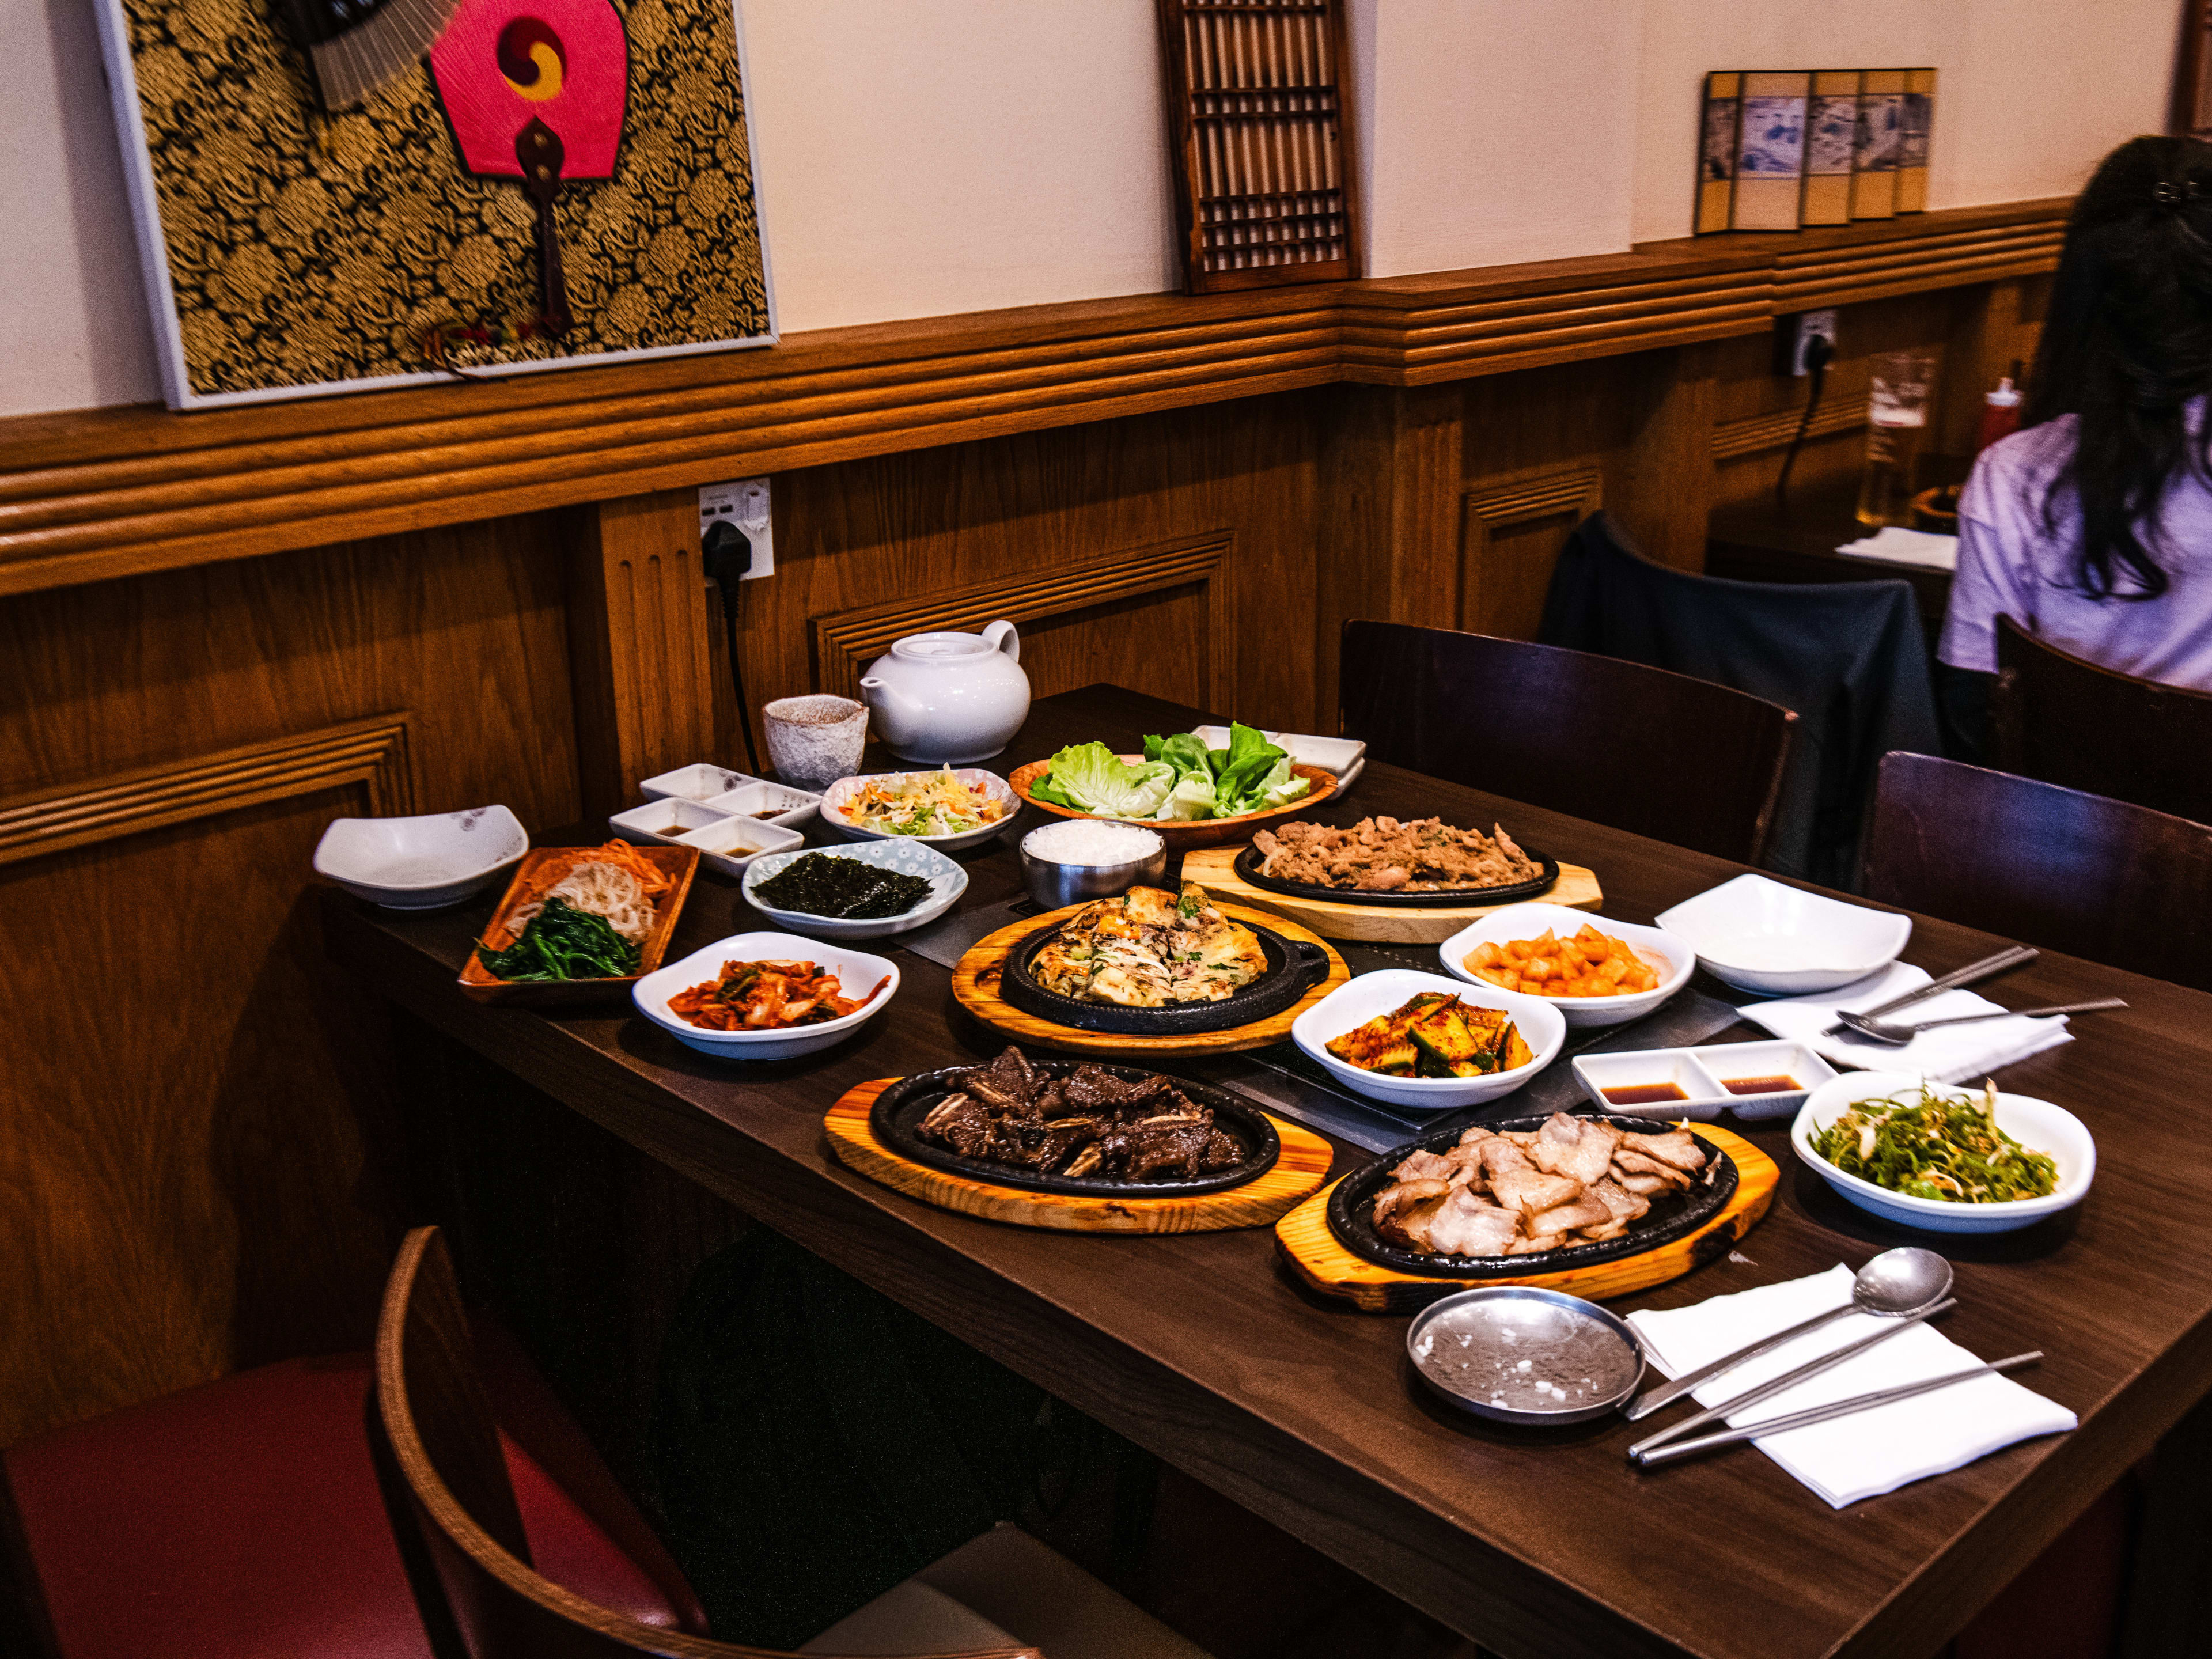 A spread of dishes take over an entire table at Spicy Grill.